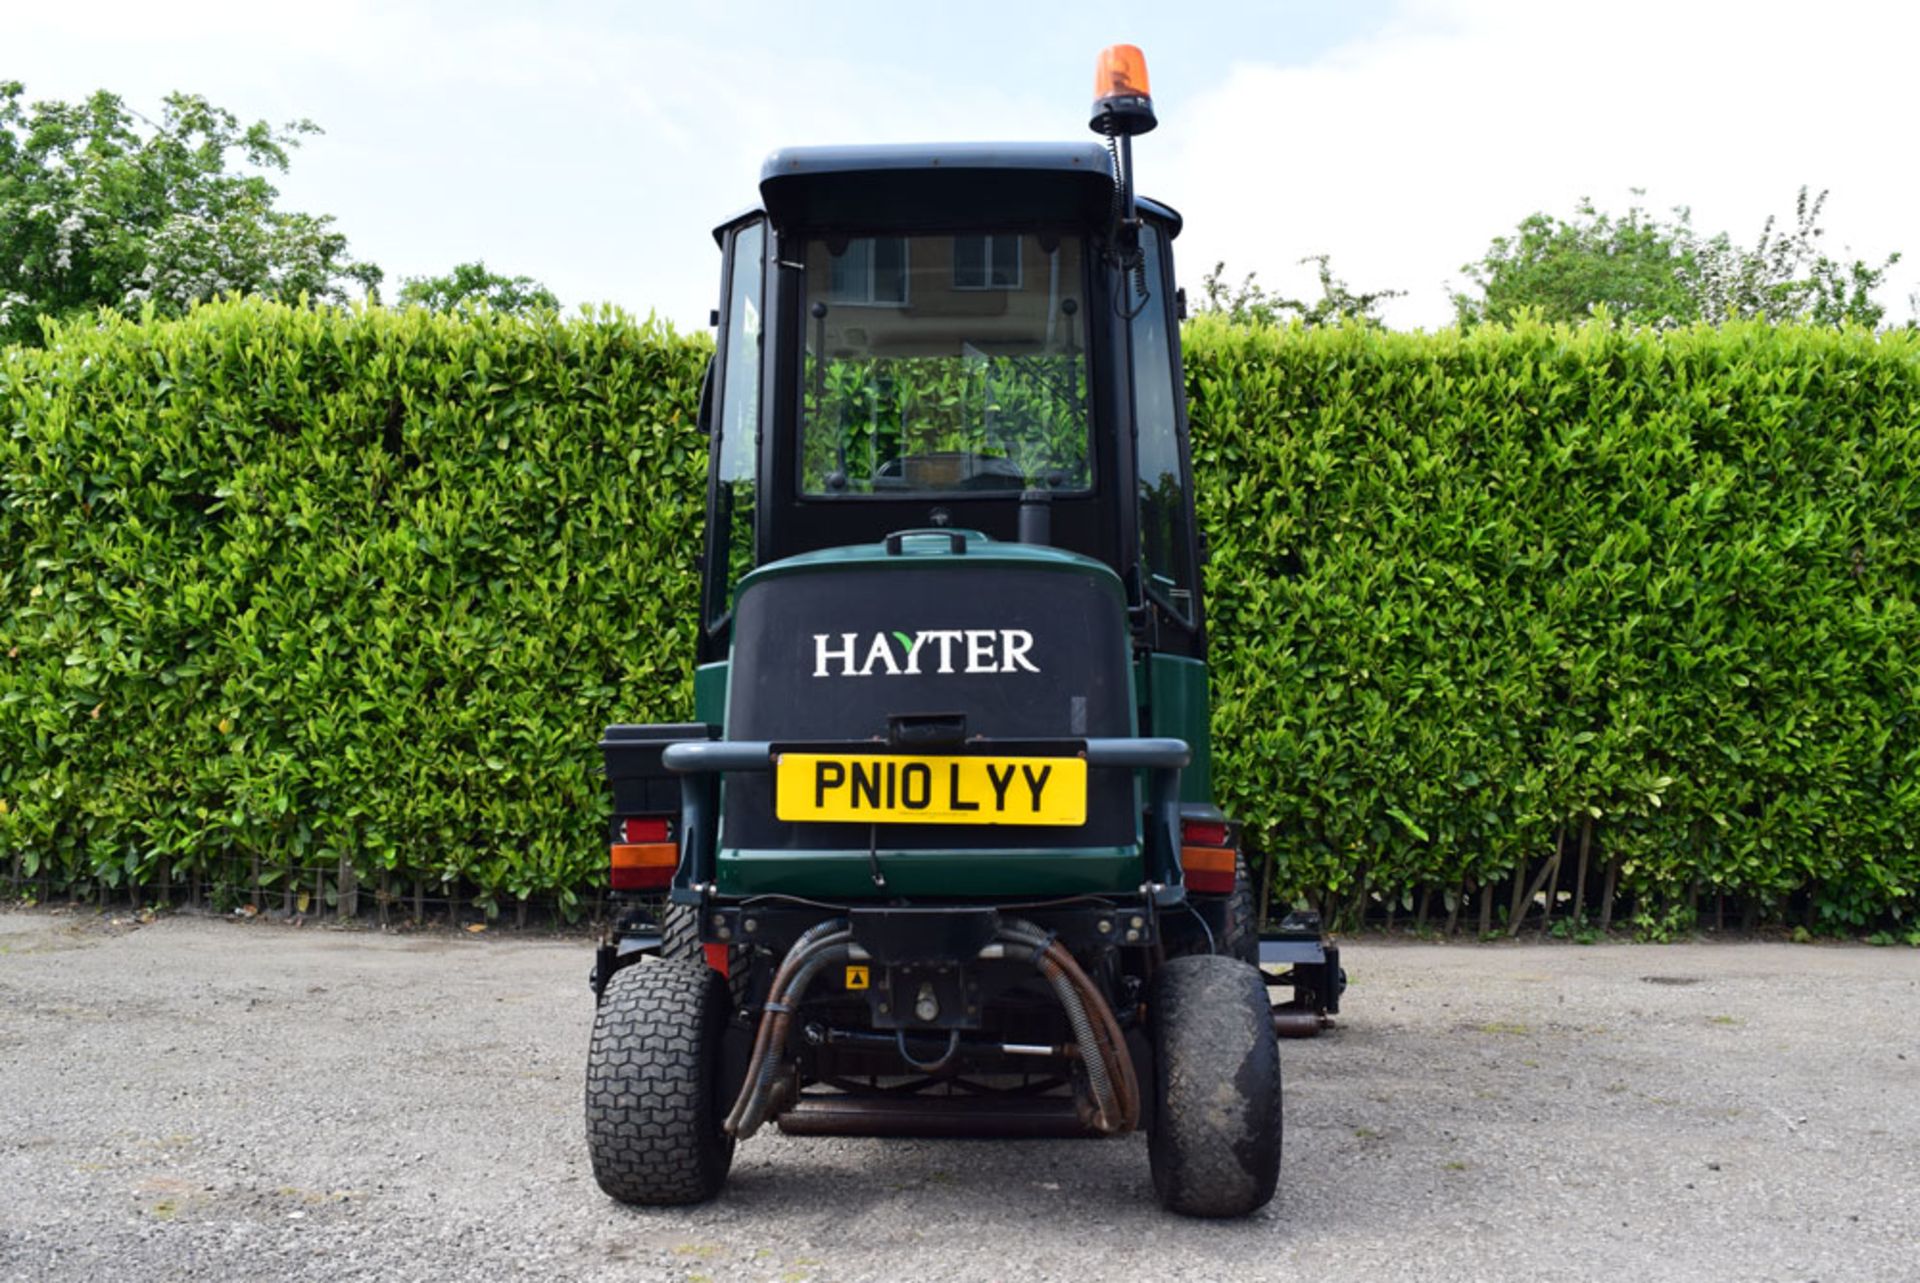 2010 Hayter LT324 Triple Cylinder Mower With Cab - Image 4 of 5